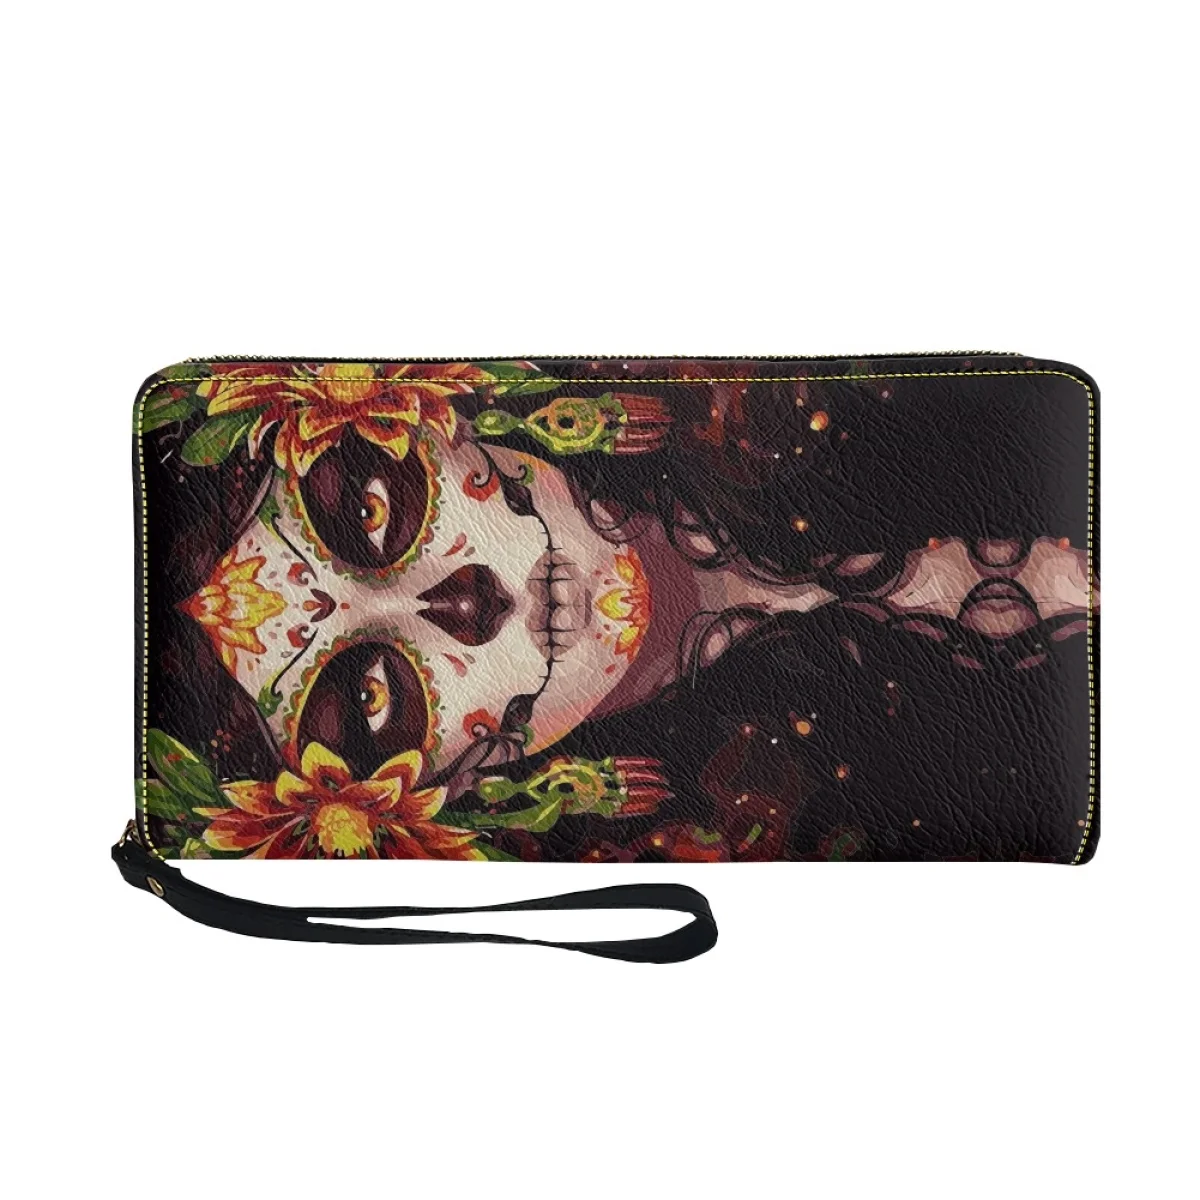 skull pattern print women's luxury brand wallet PU Leather multifunction cardholder coin Wallets With Strap carteras de mujer